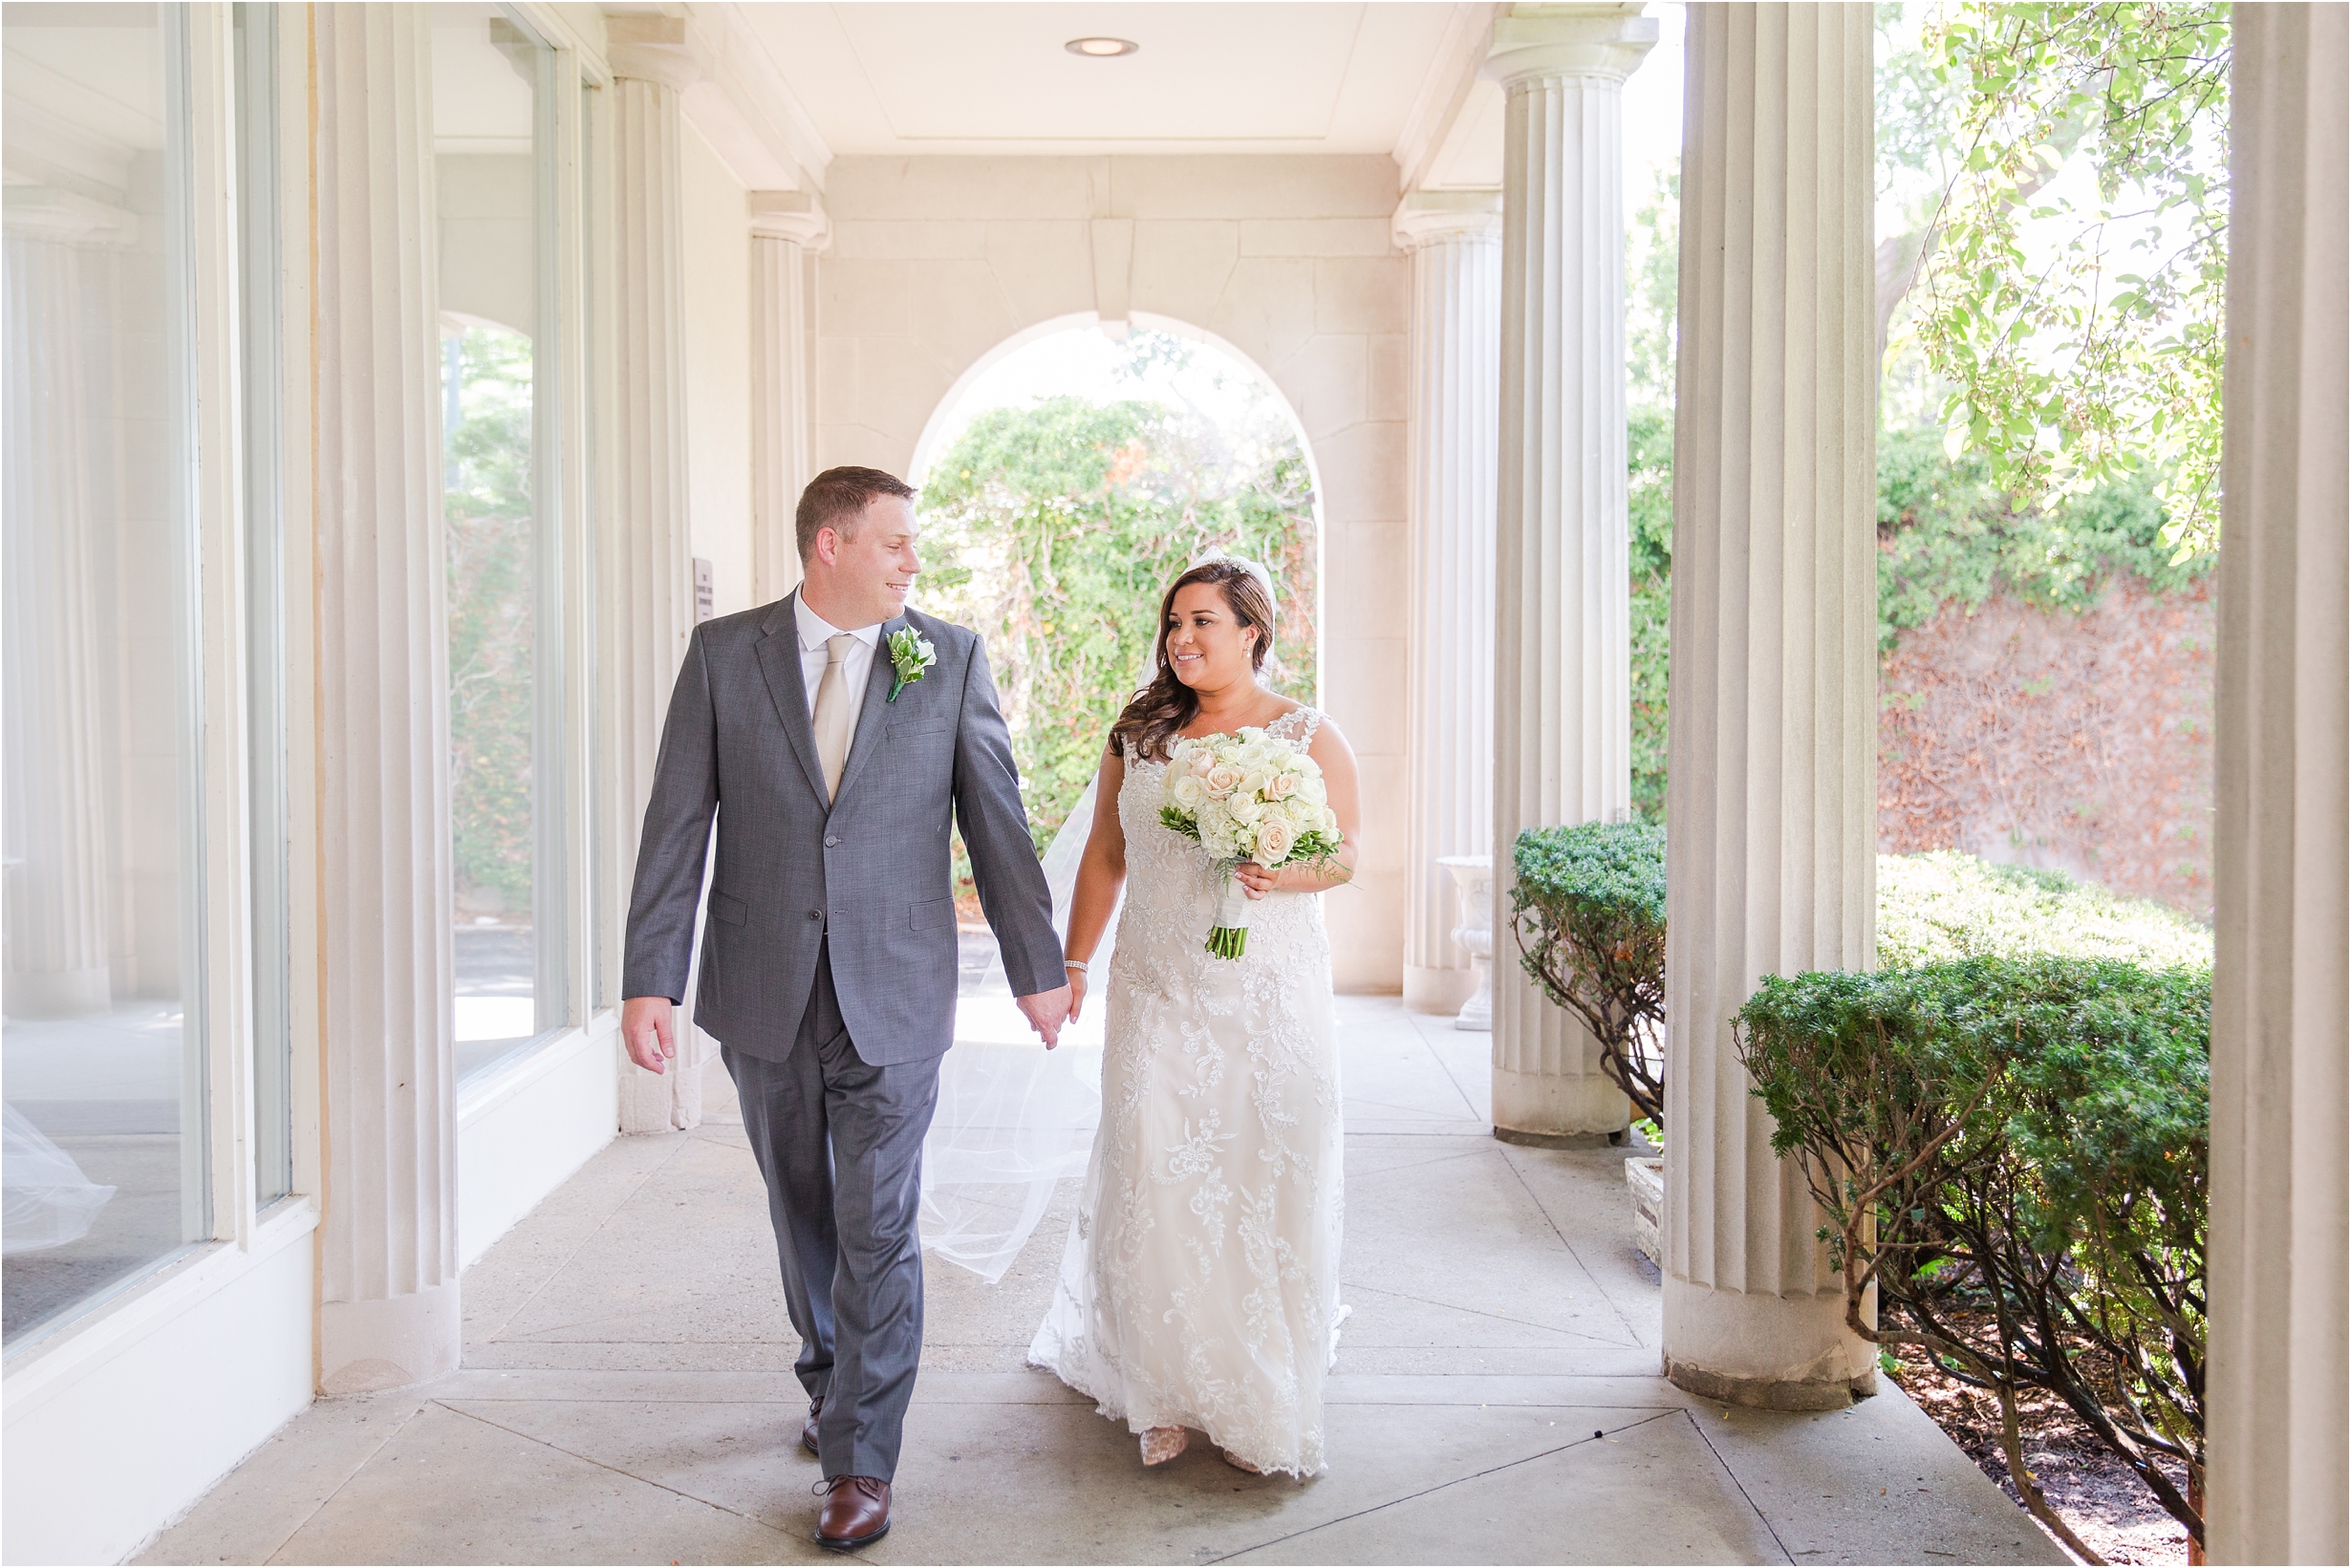 romantic-timeless-candid-wedding-photos-at-the-war-memorial-in-grosse-pointe-mi-by-courtney-carolyn-photography_0004.jpg